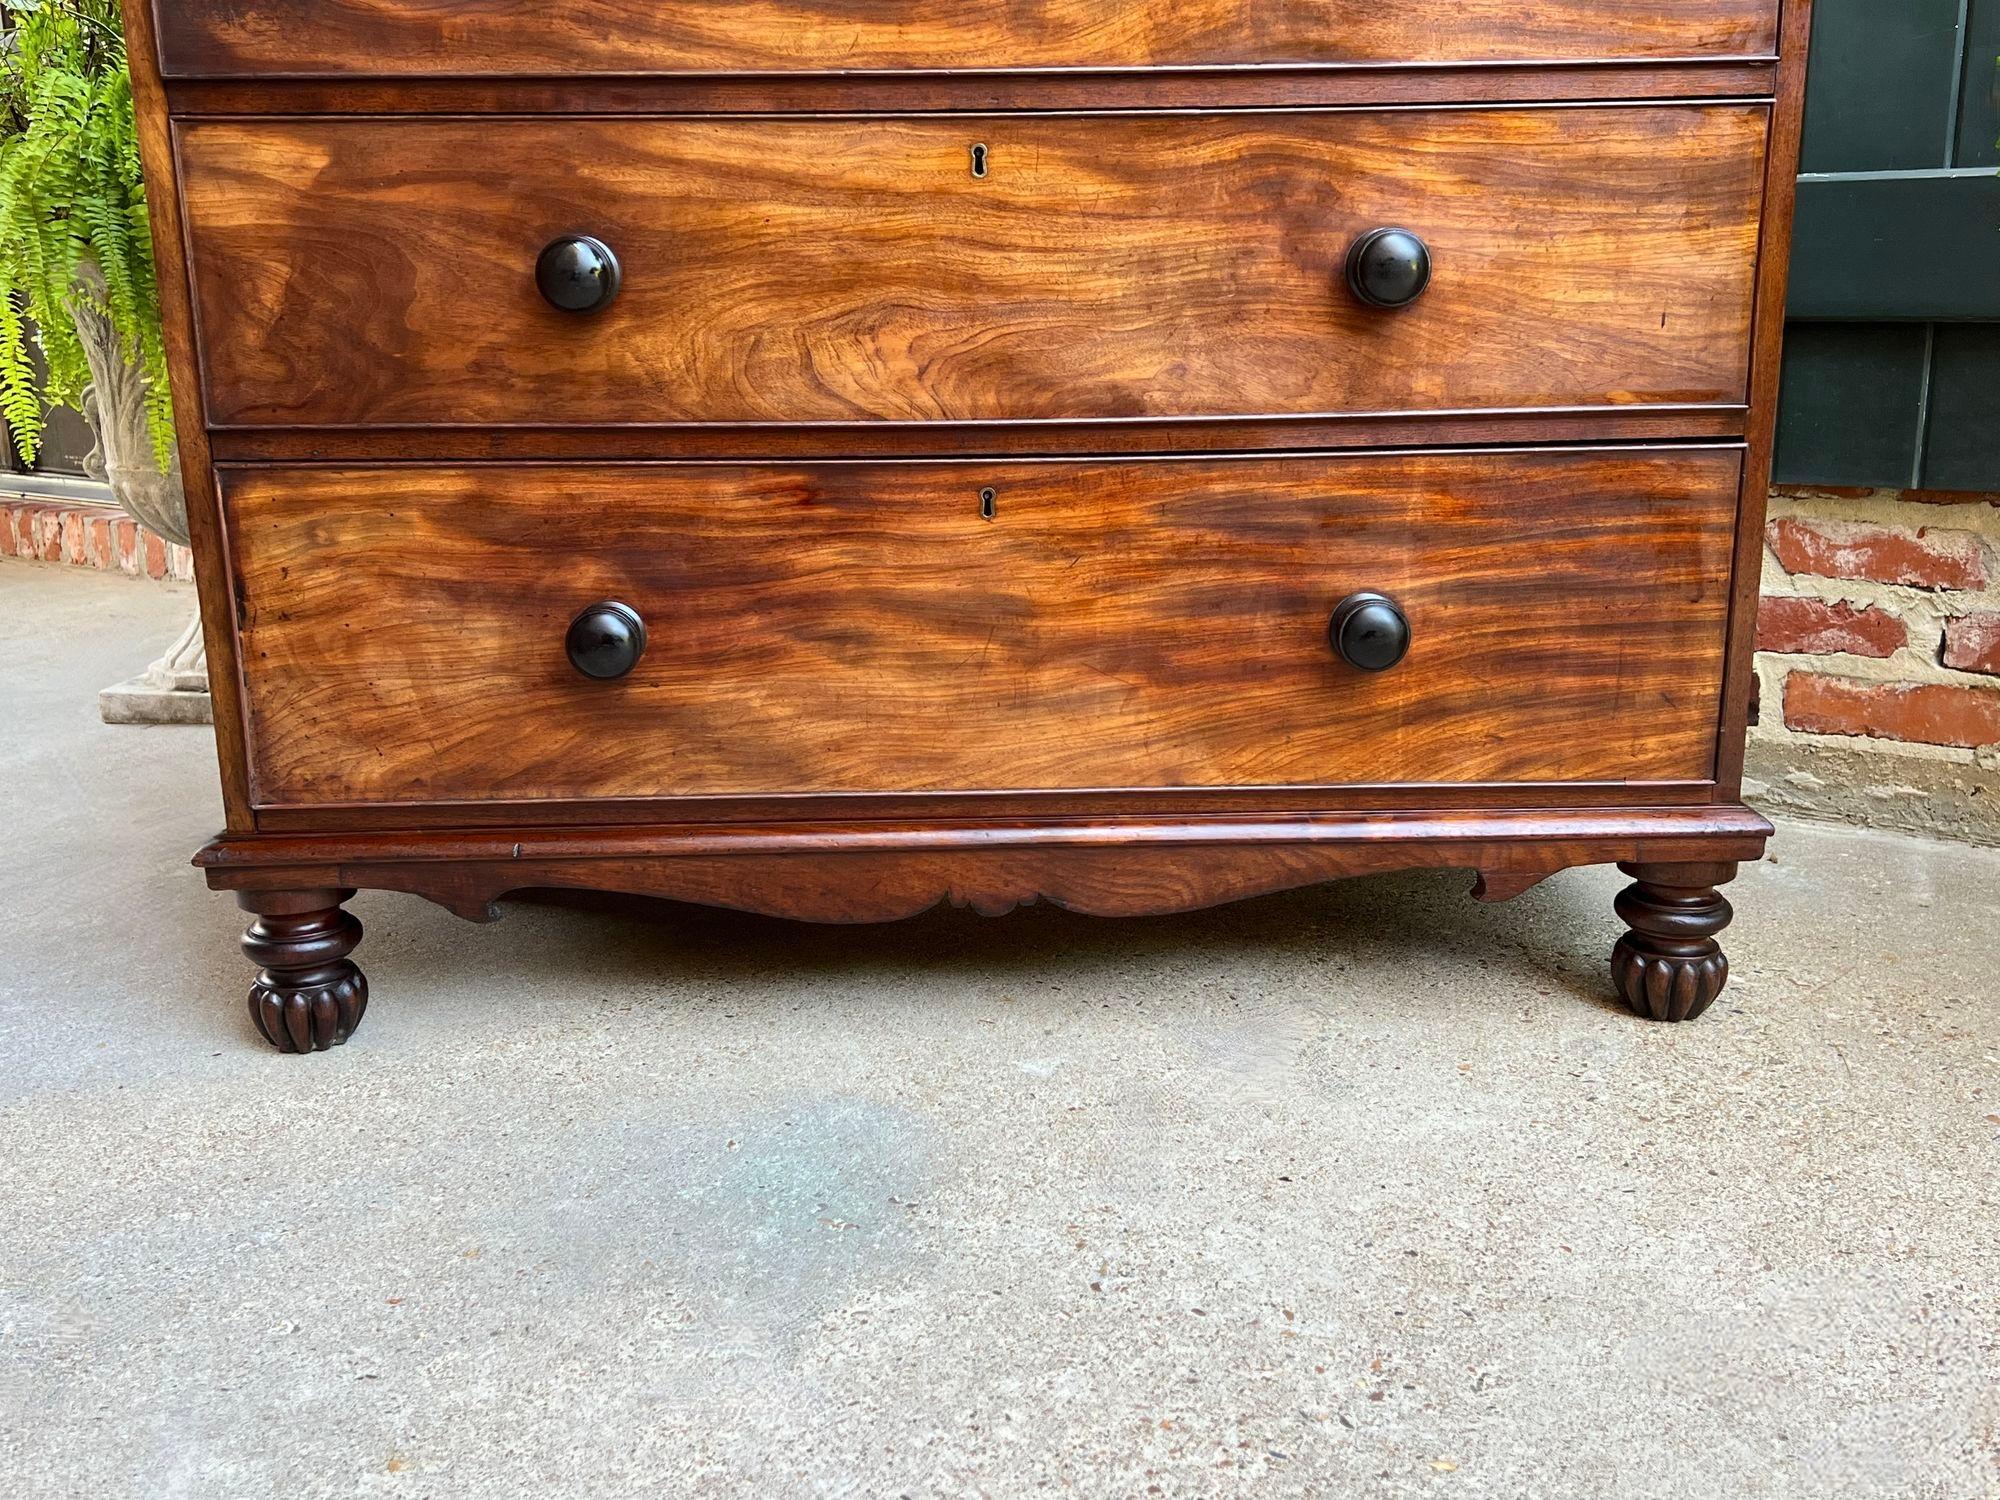 Antique English Chest of Drawers Burl Mahogany Victorian Dresser Cabinet In Good Condition For Sale In Shreveport, LA